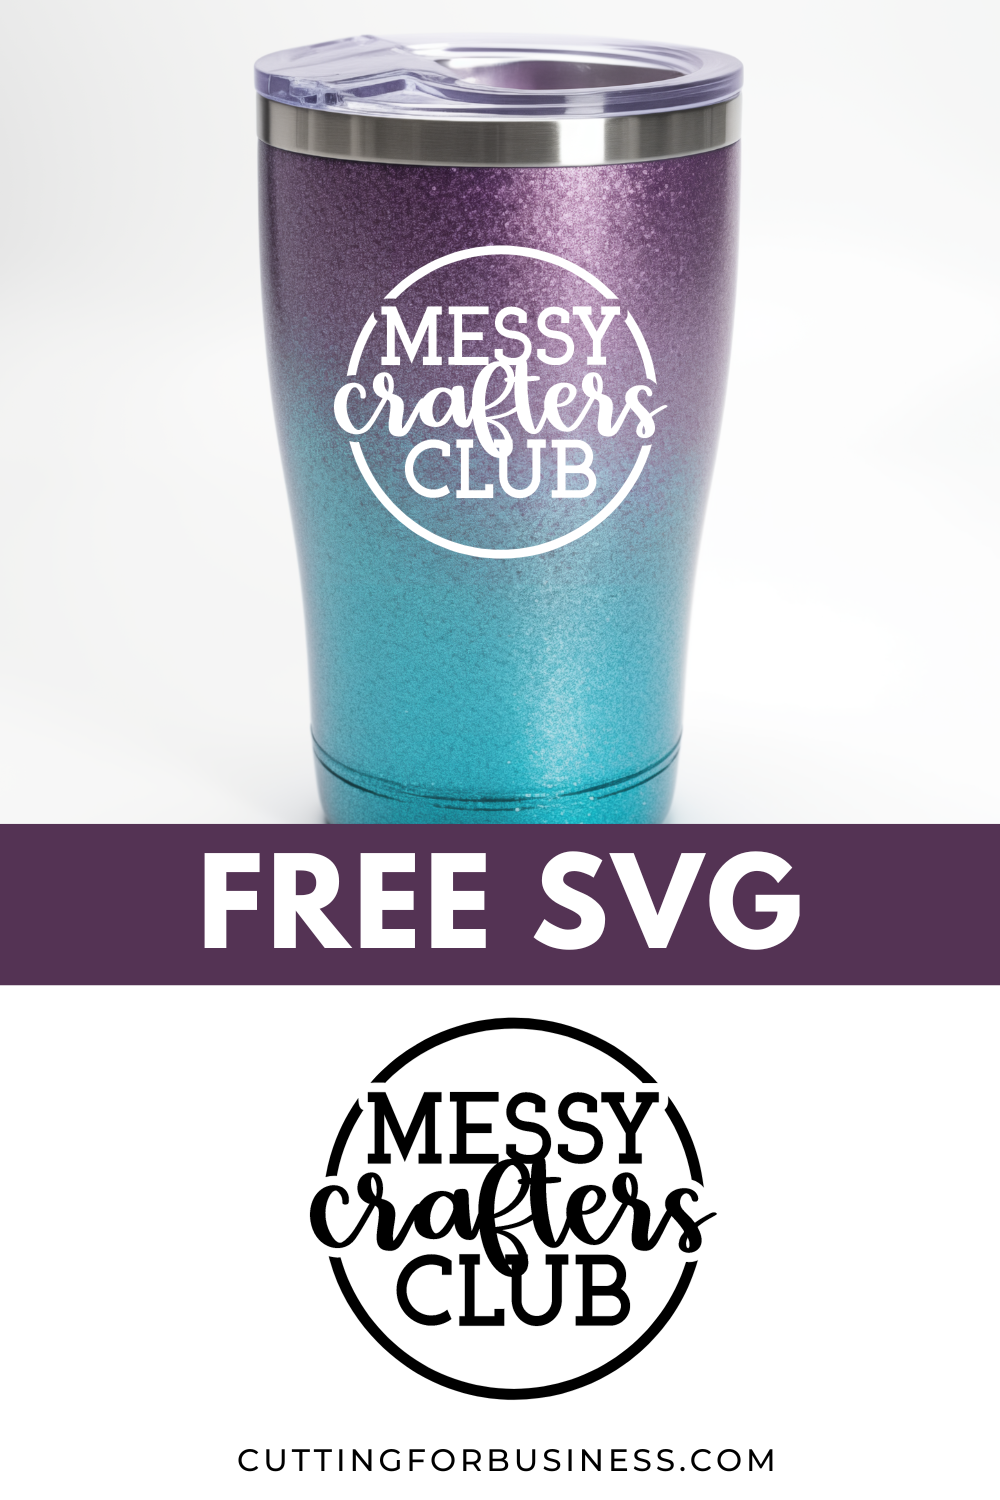 Free Messy Crafters Club SVG - cuttingforbusiness.com